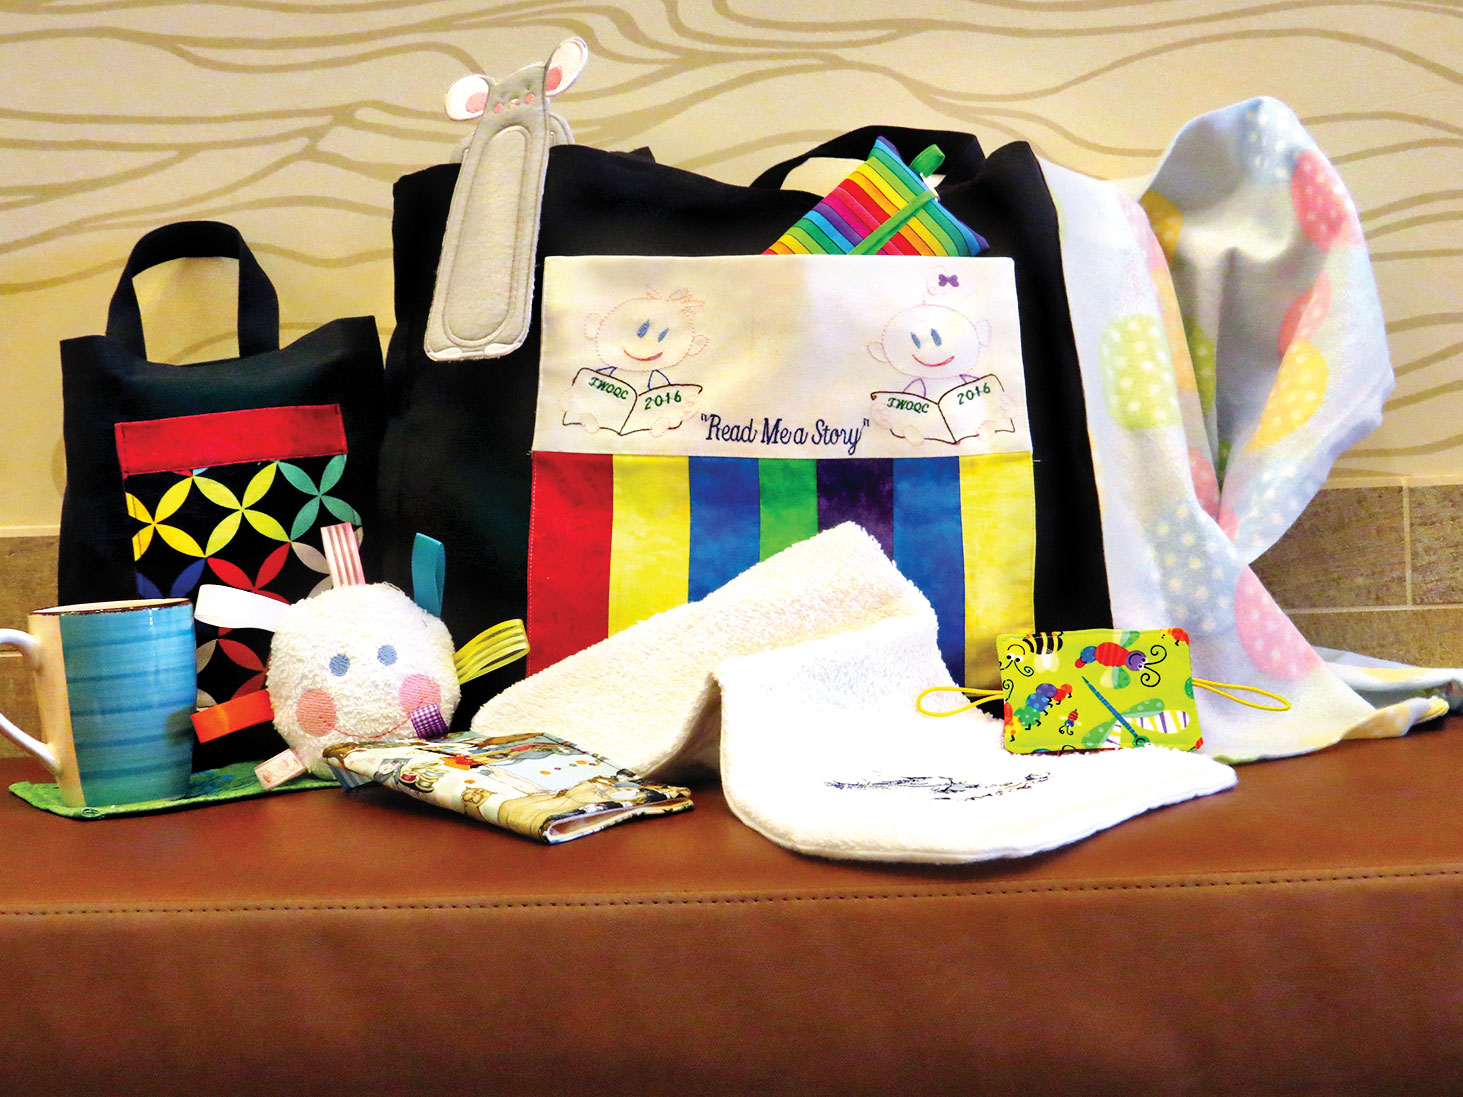 A sample of the numerous baby and mom items that are being made by SueAnn Obremski.